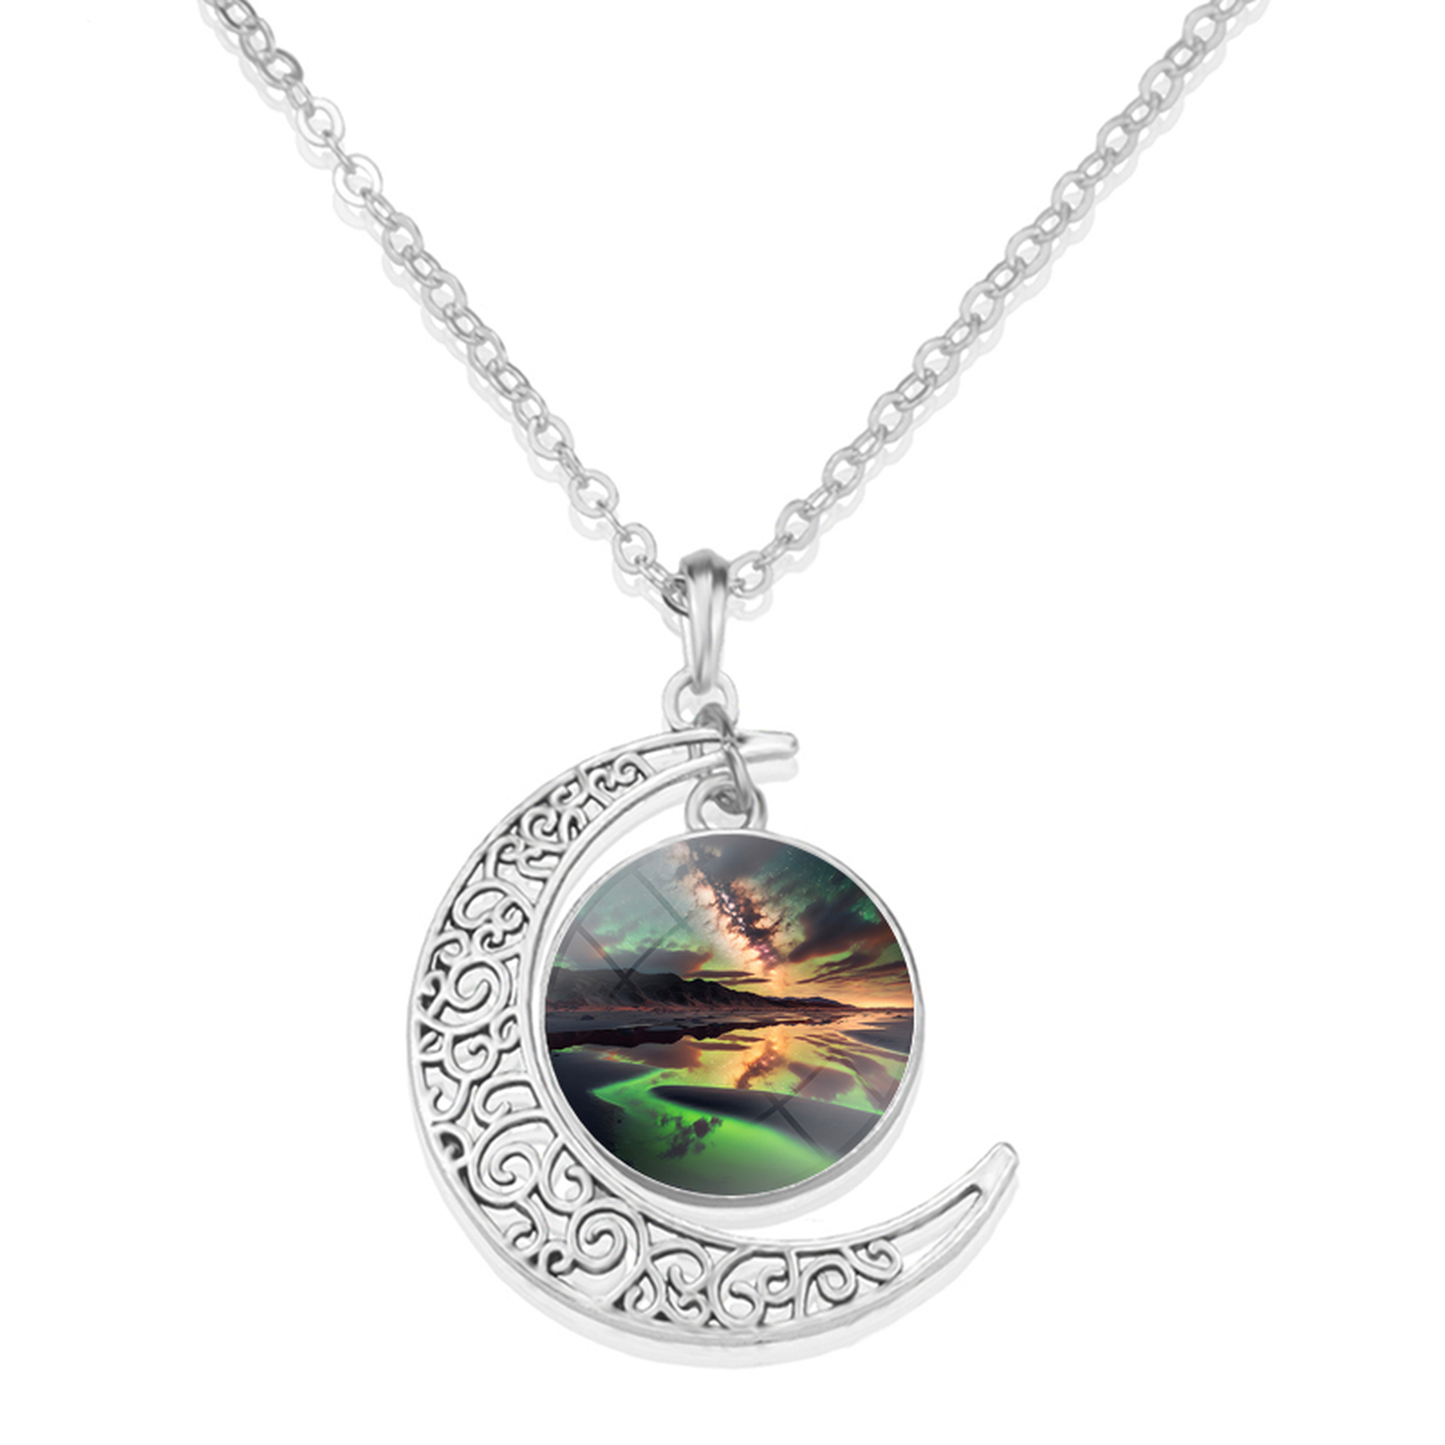 Unique Aurora Borealis Crescent Necklace - Northern Light Jewelry - Crescent Glass Cabochon Pendent Necklace - Perfect Aurora Lovers Gift 14